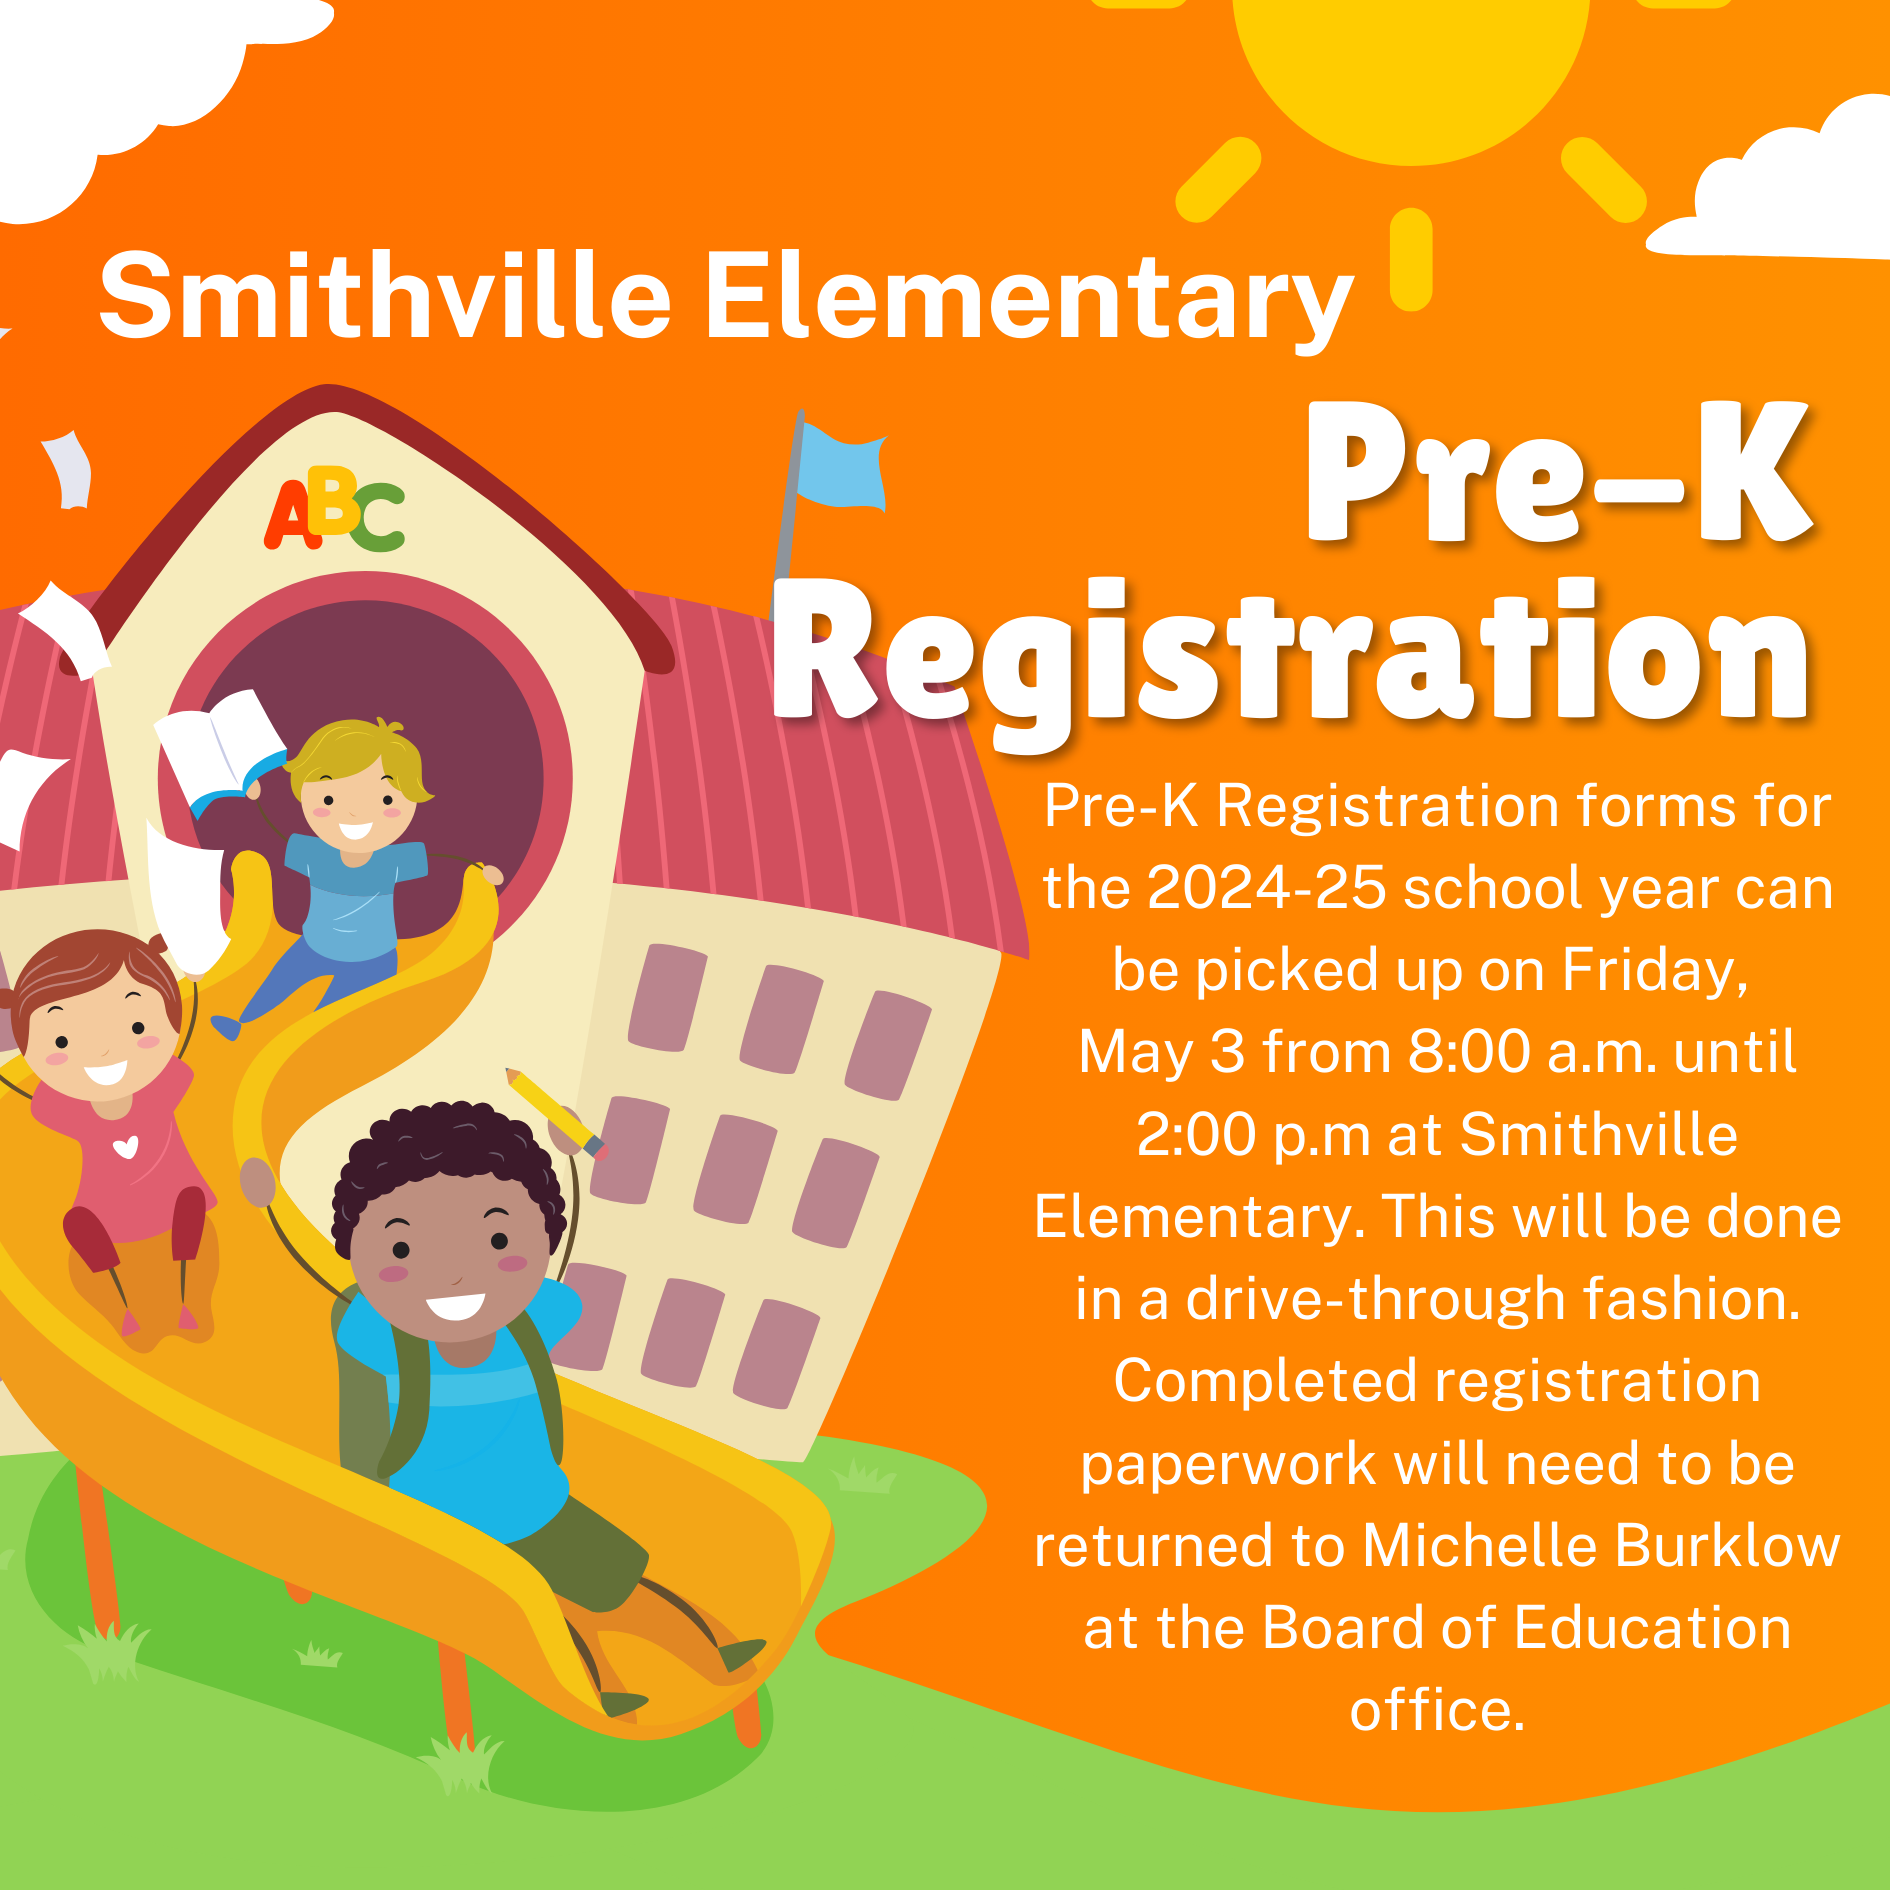 Pre-K Registration forms for the 2024-25 school year can be picked up on Friday, May 3 from 8:00 a.m. until 2:00 p.m at Smithville Elementary. This will be done in a drive-through fashion. Completed registration paperwork will need to be returned to Michelle Burklow at the Board of Education office.